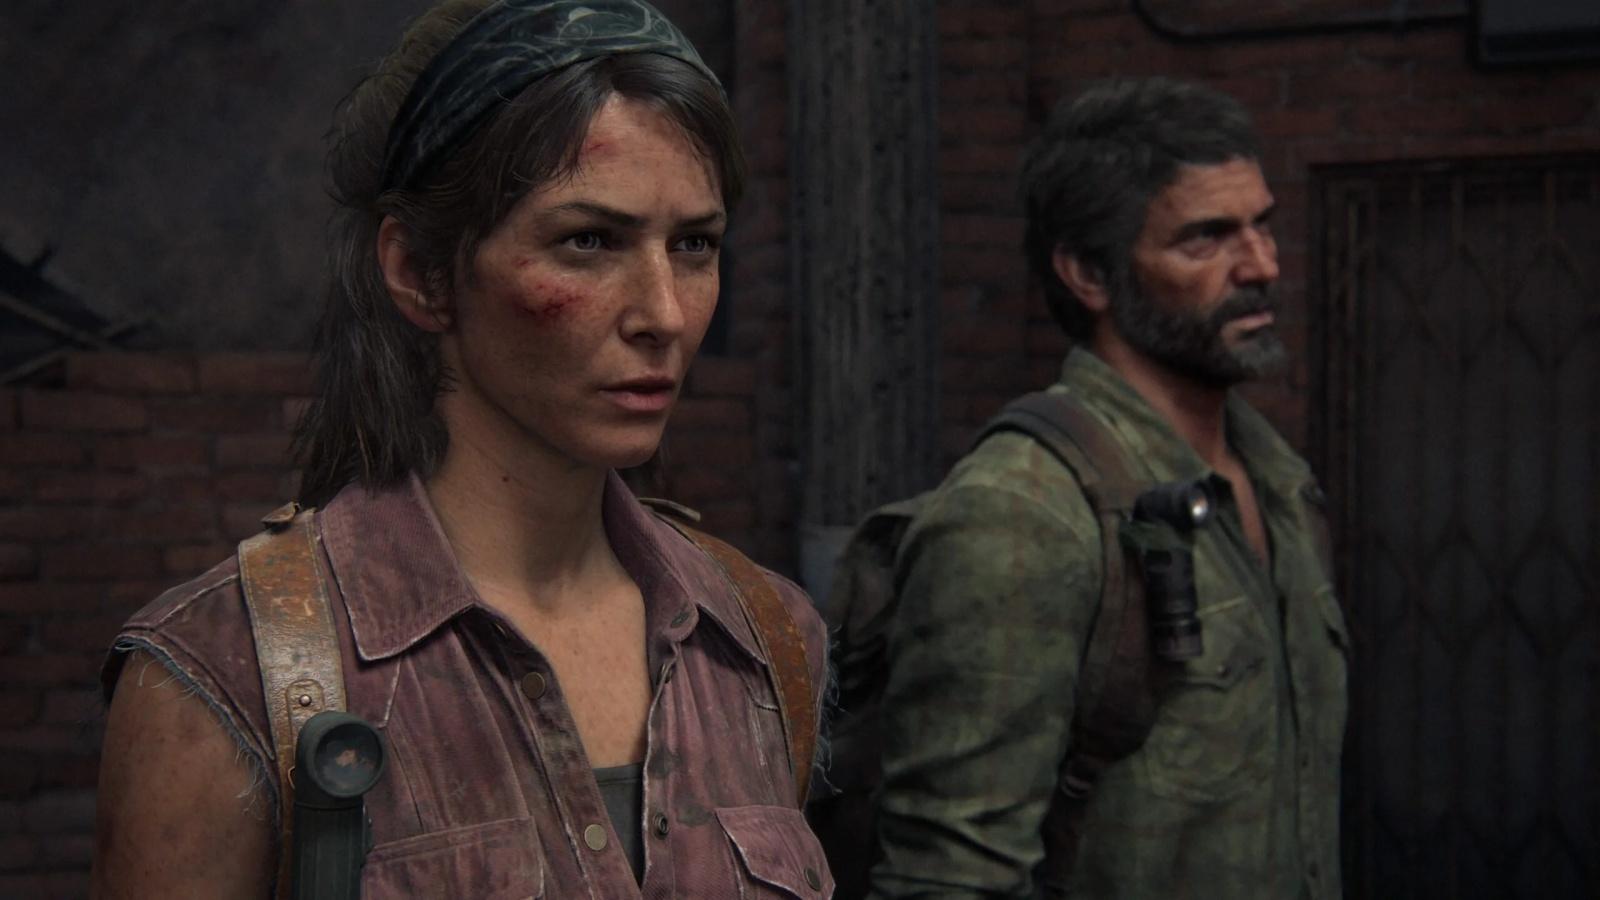 Last of Us Part 1 user reviews call it the “single worst PC port